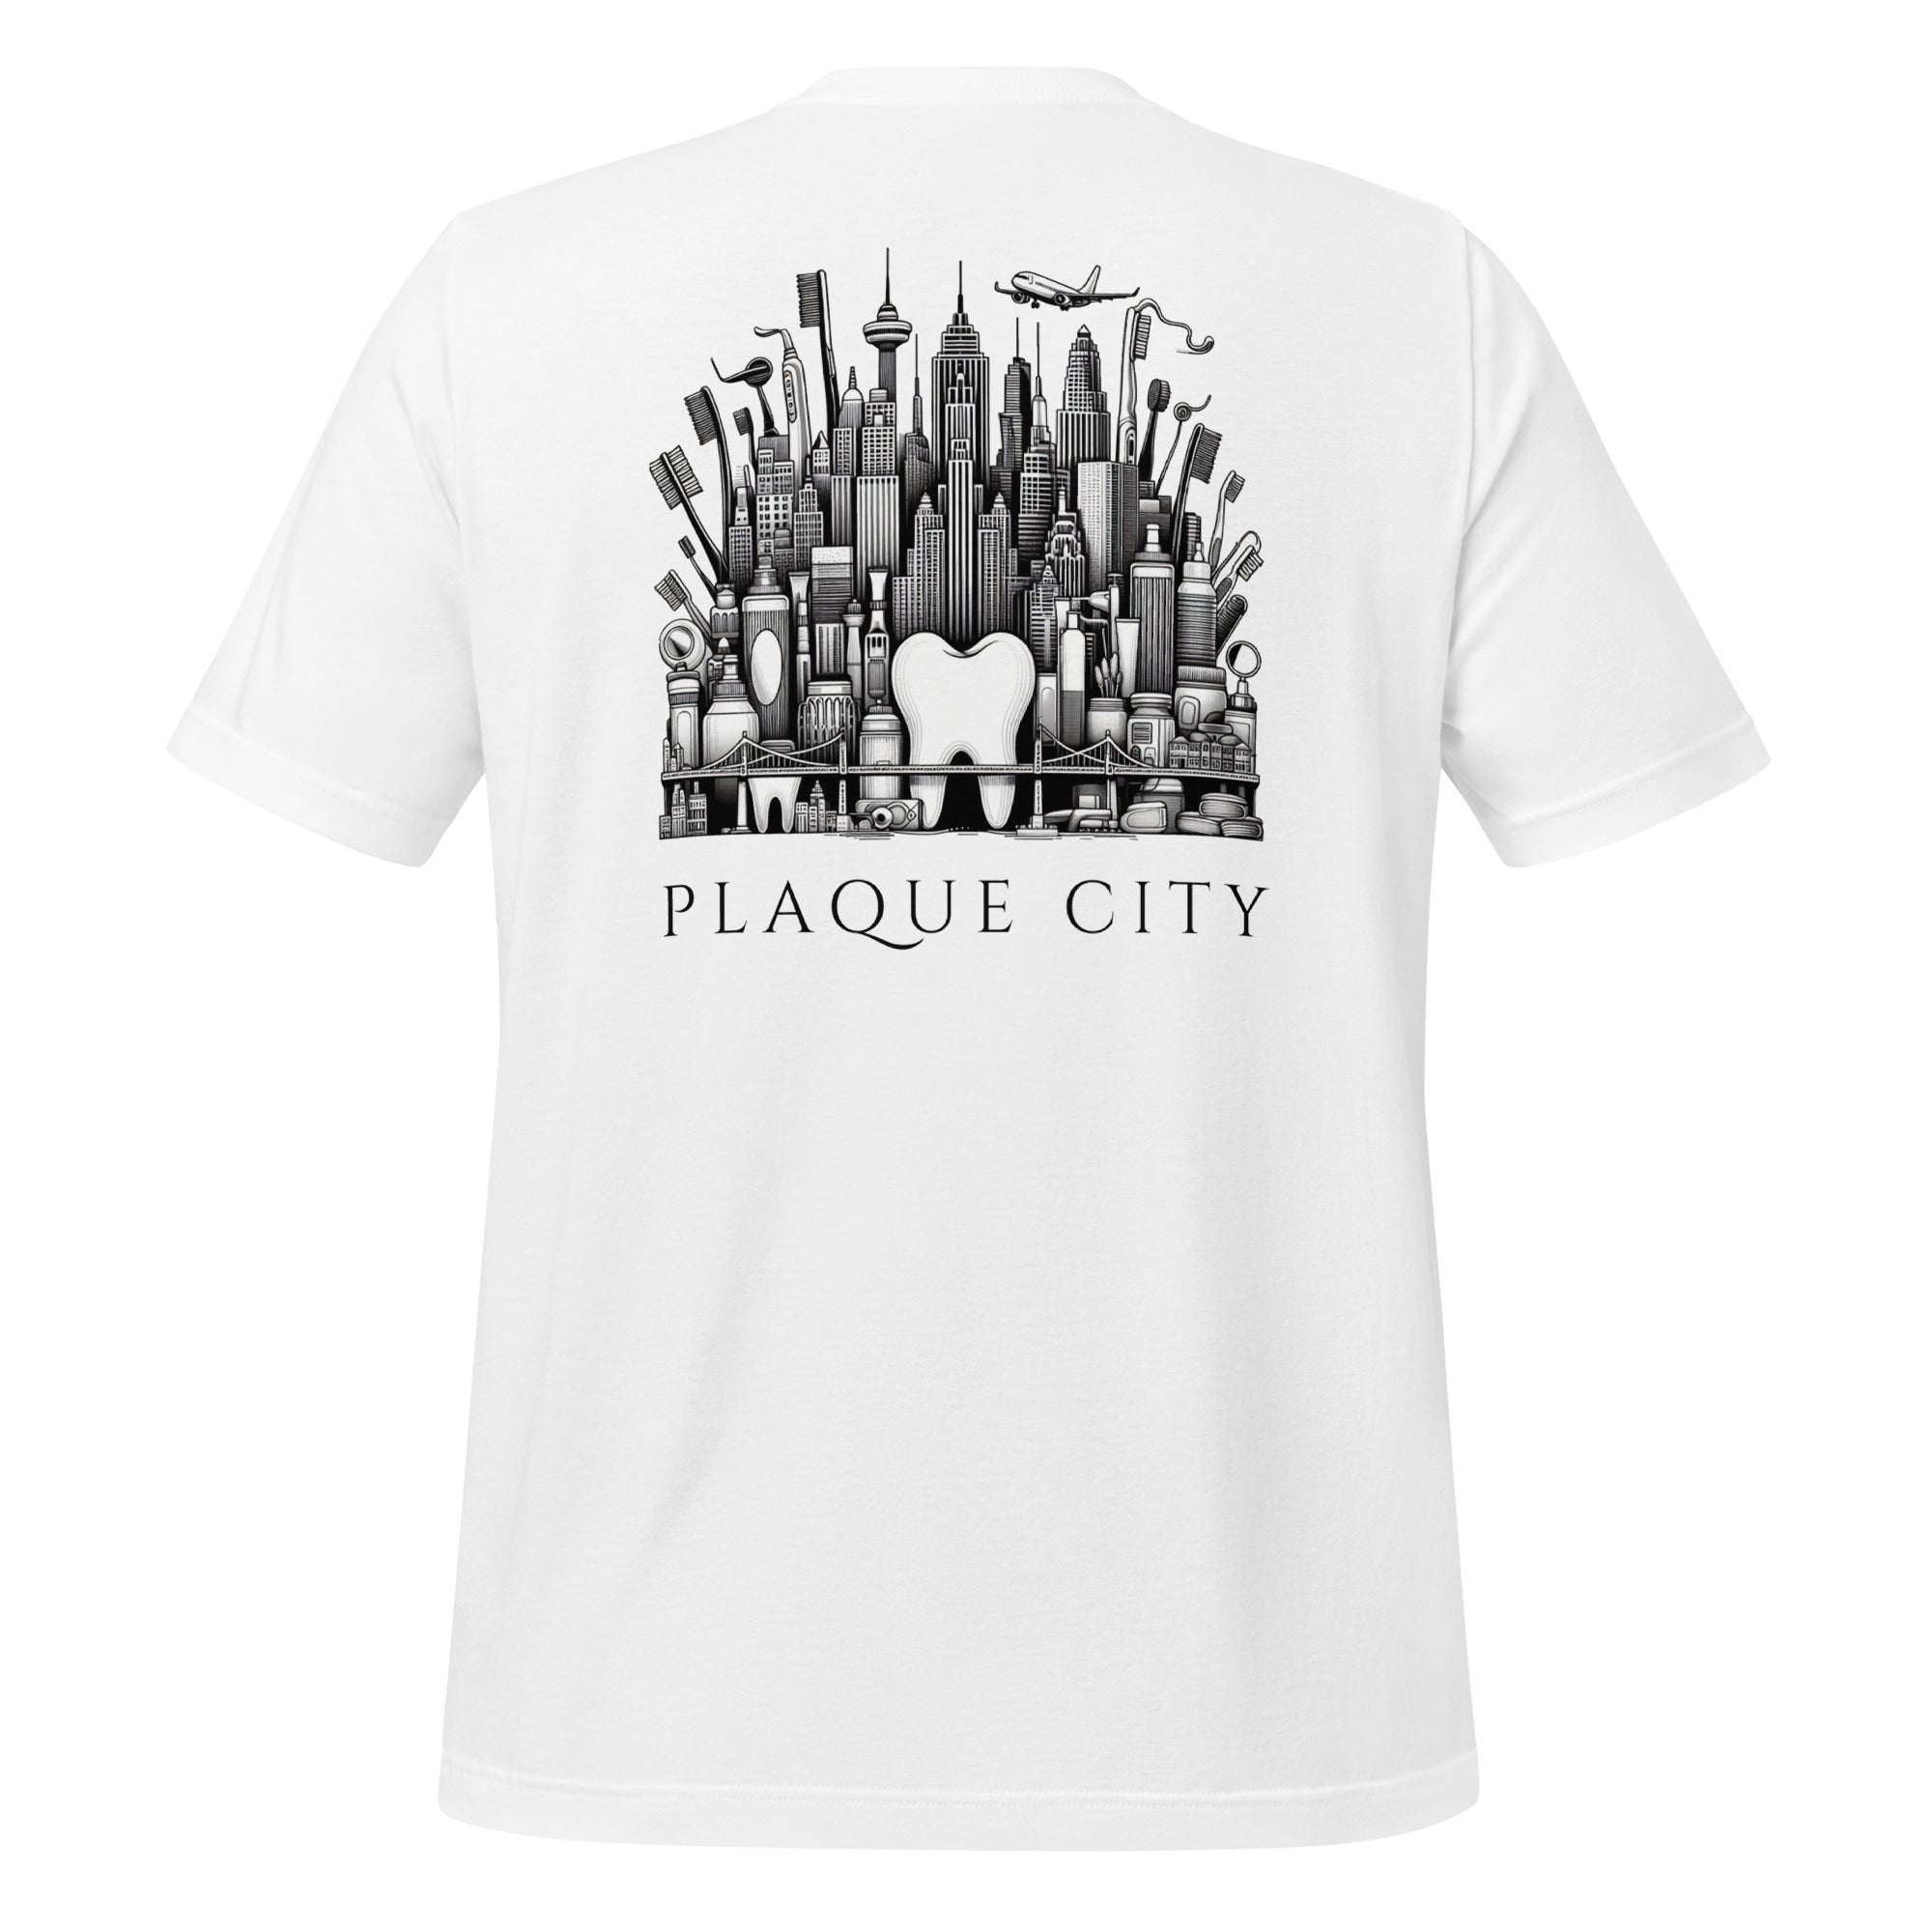 Cityscape illustration made of dental hygiene products, including toothpaste tubes, toothbrushes, and floss containers. Perfect for a dentist or dental hygienist gift, or a unique dental-themed t-shirt design. White color.